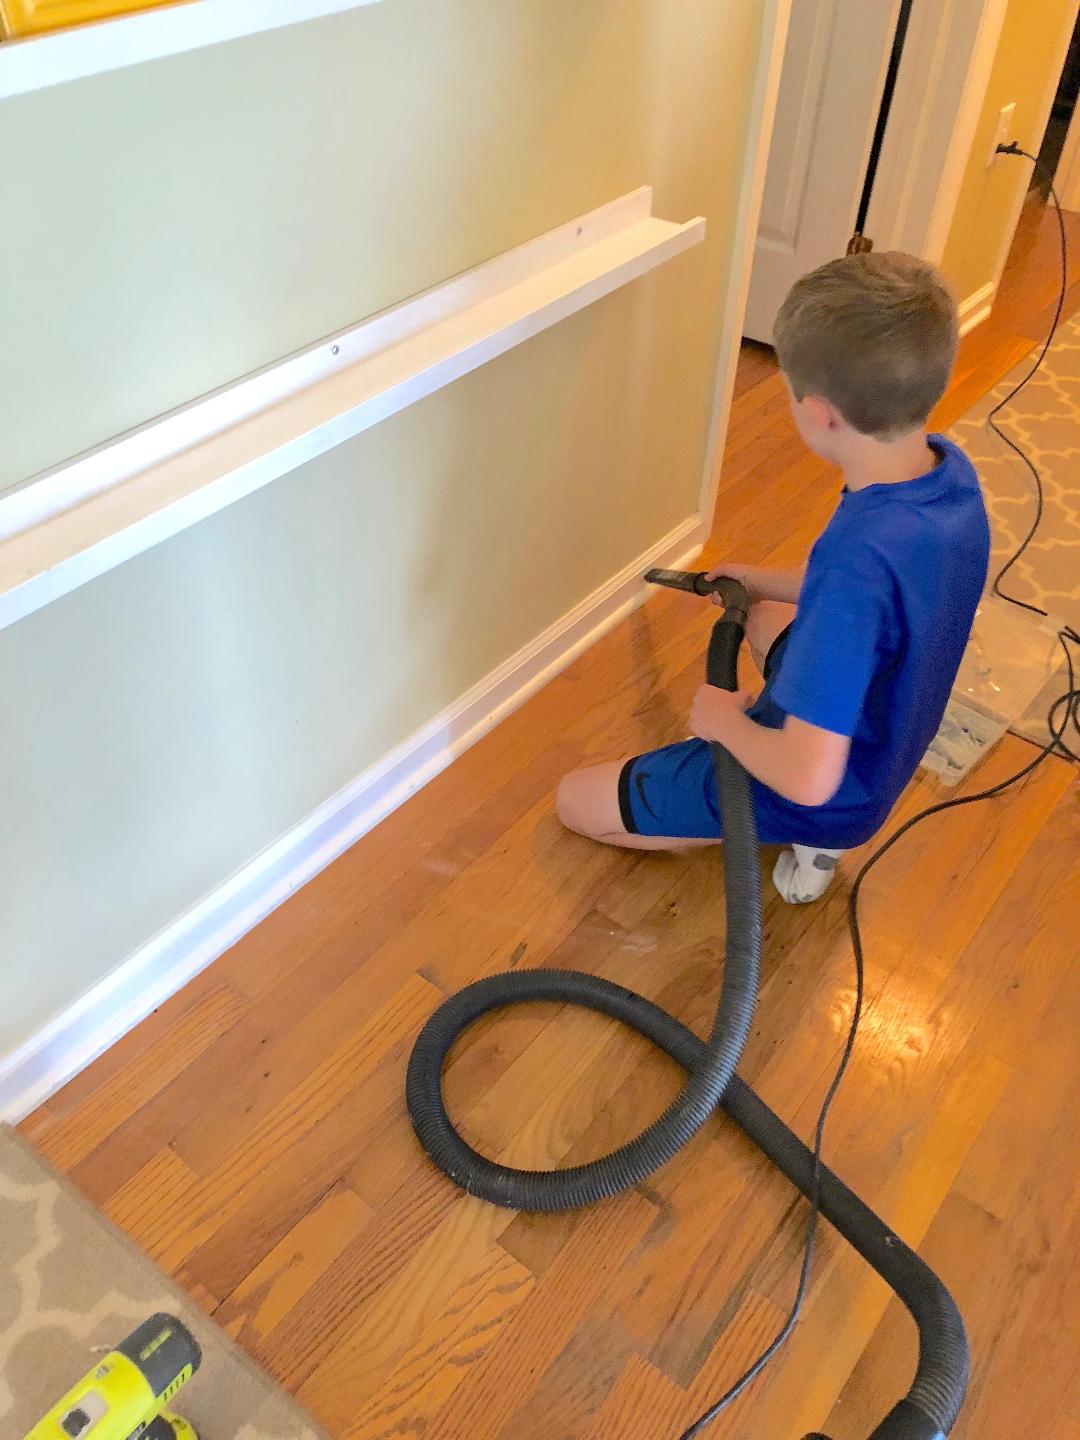 child vacuuming up dust on a floor